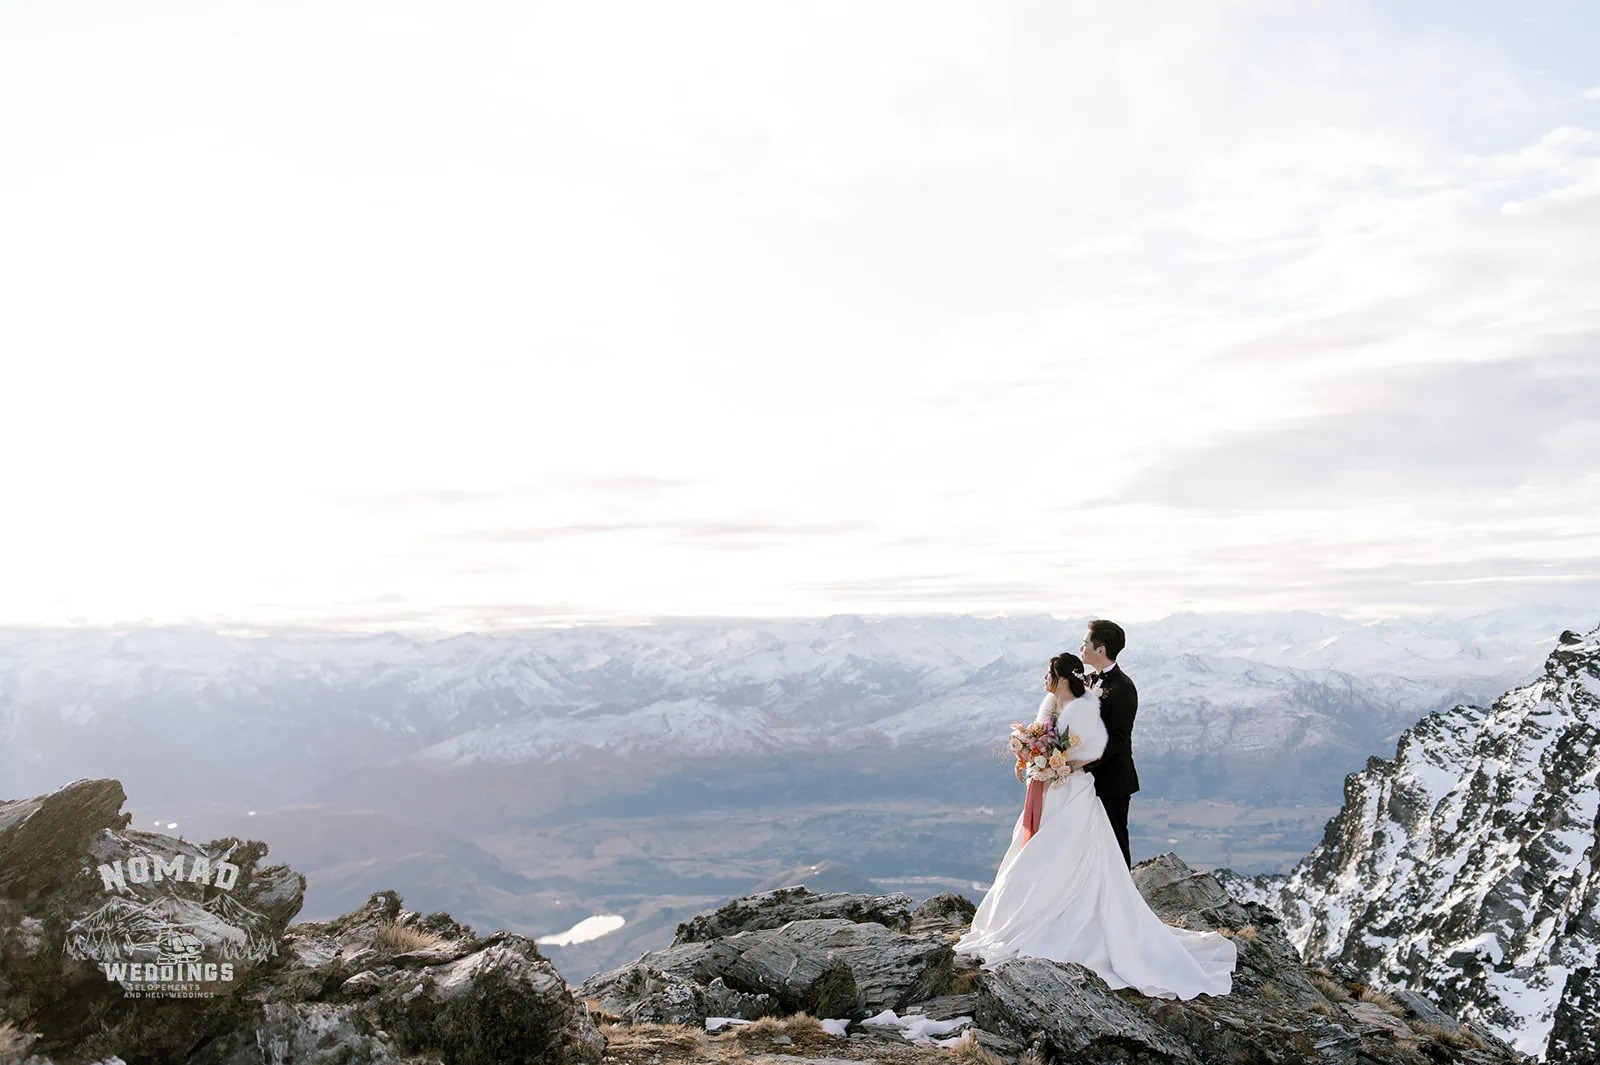 Queenstown New Zealand Elopement Wedding Photographer - Bo and Junyi, a couple, having a heli pre wedding shoot with 4 landings on top of a mountain in New Zealand.